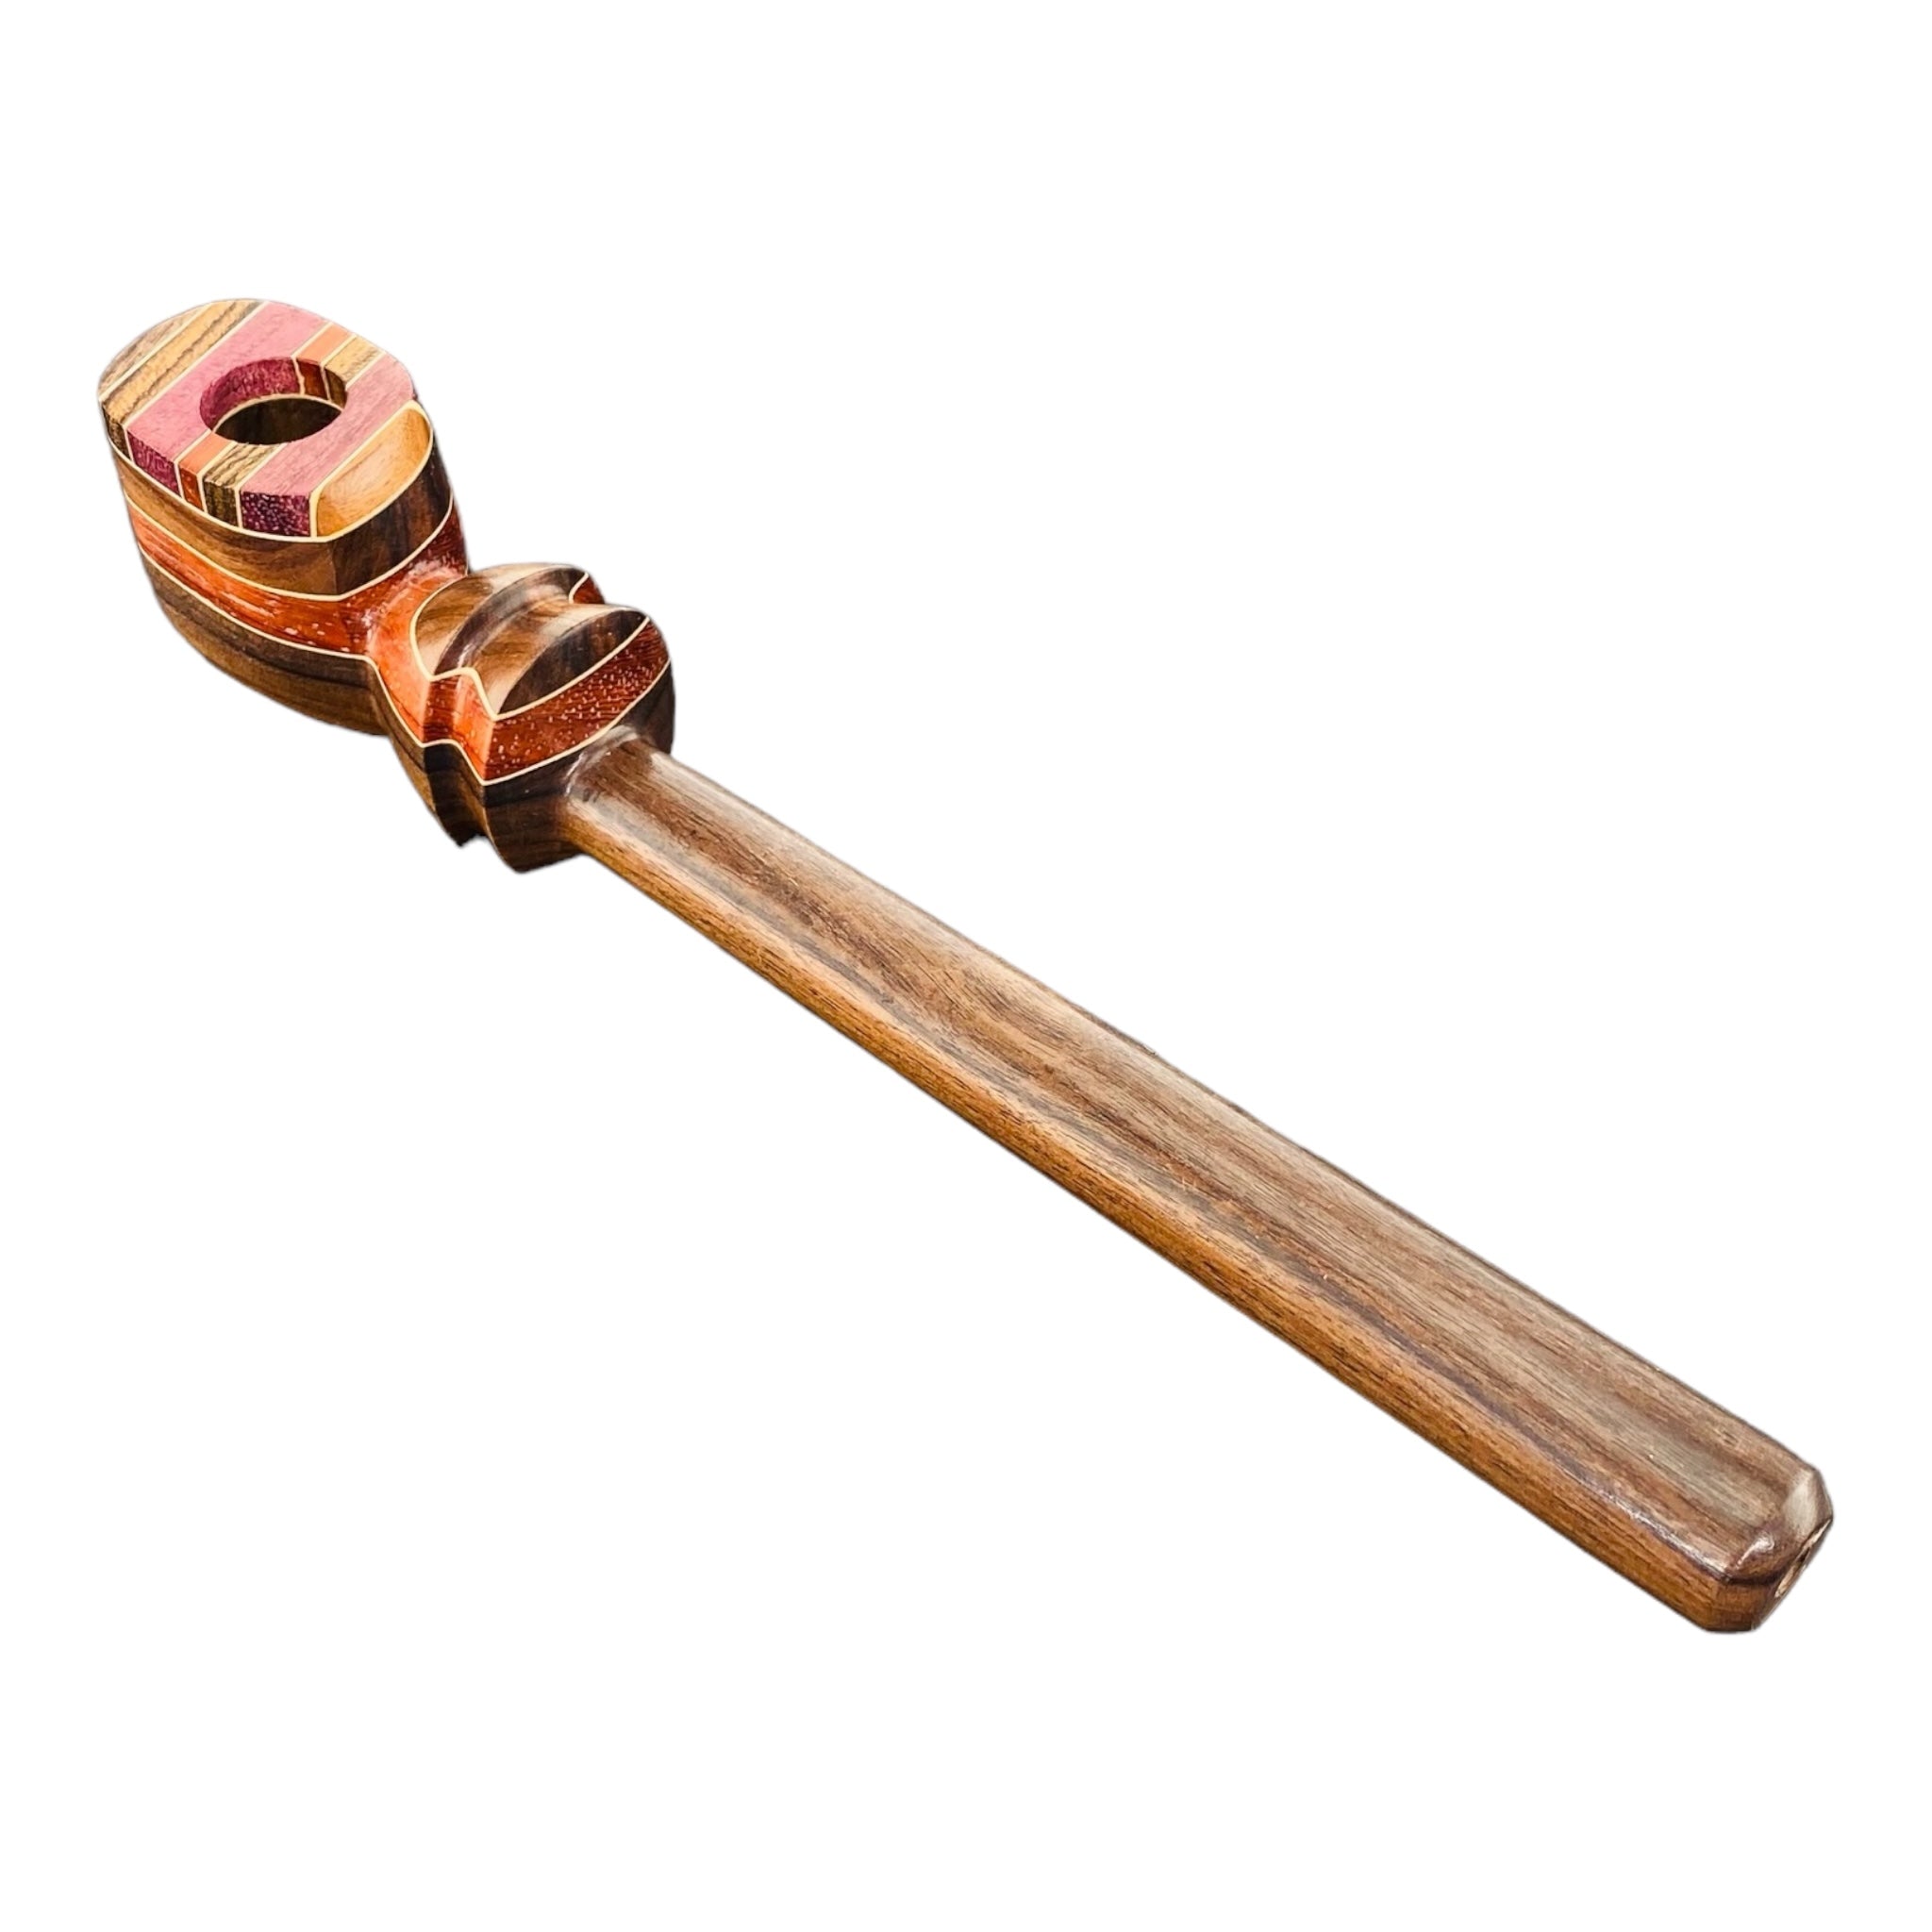 Wood Hand Pipe - 8 Inch Long Stem Peace Pipe Shape Wood Pipe